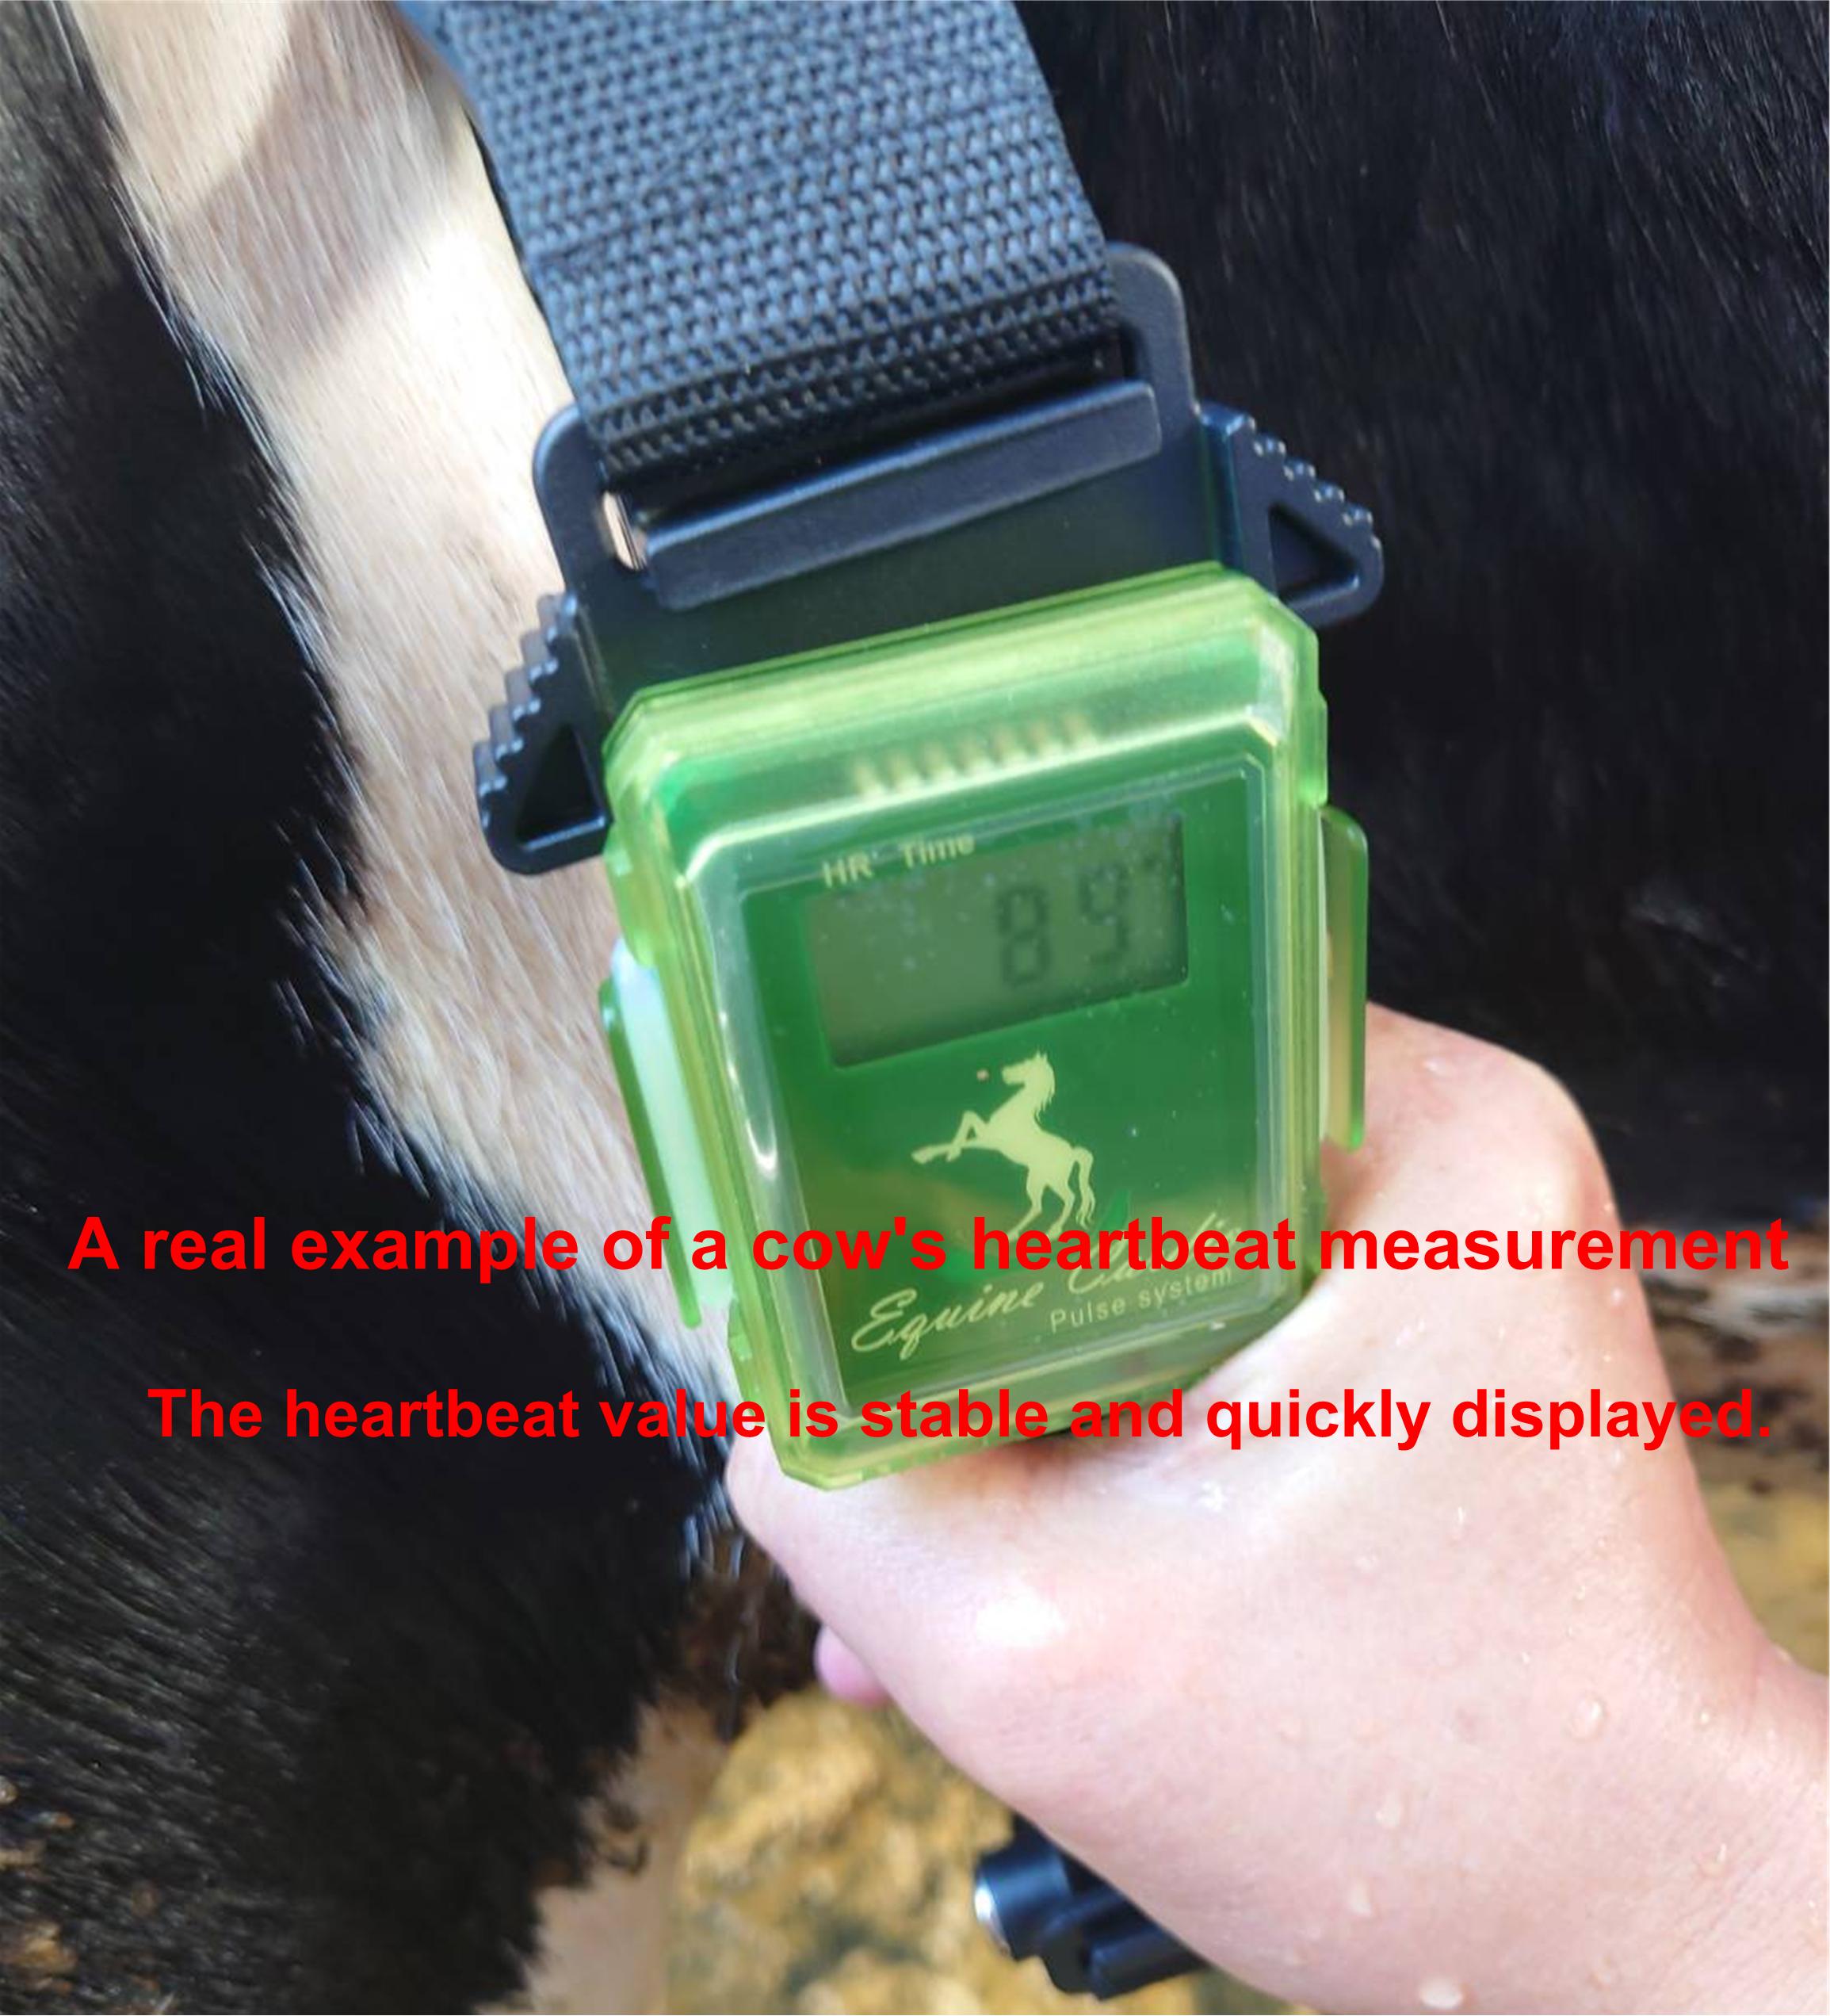 Lifevisa,lifevisa,Taiwan Biotronic,A real example of a cow's heartbeat measurement,heart rate monitor,Biotronic pulse heart rate monitor,